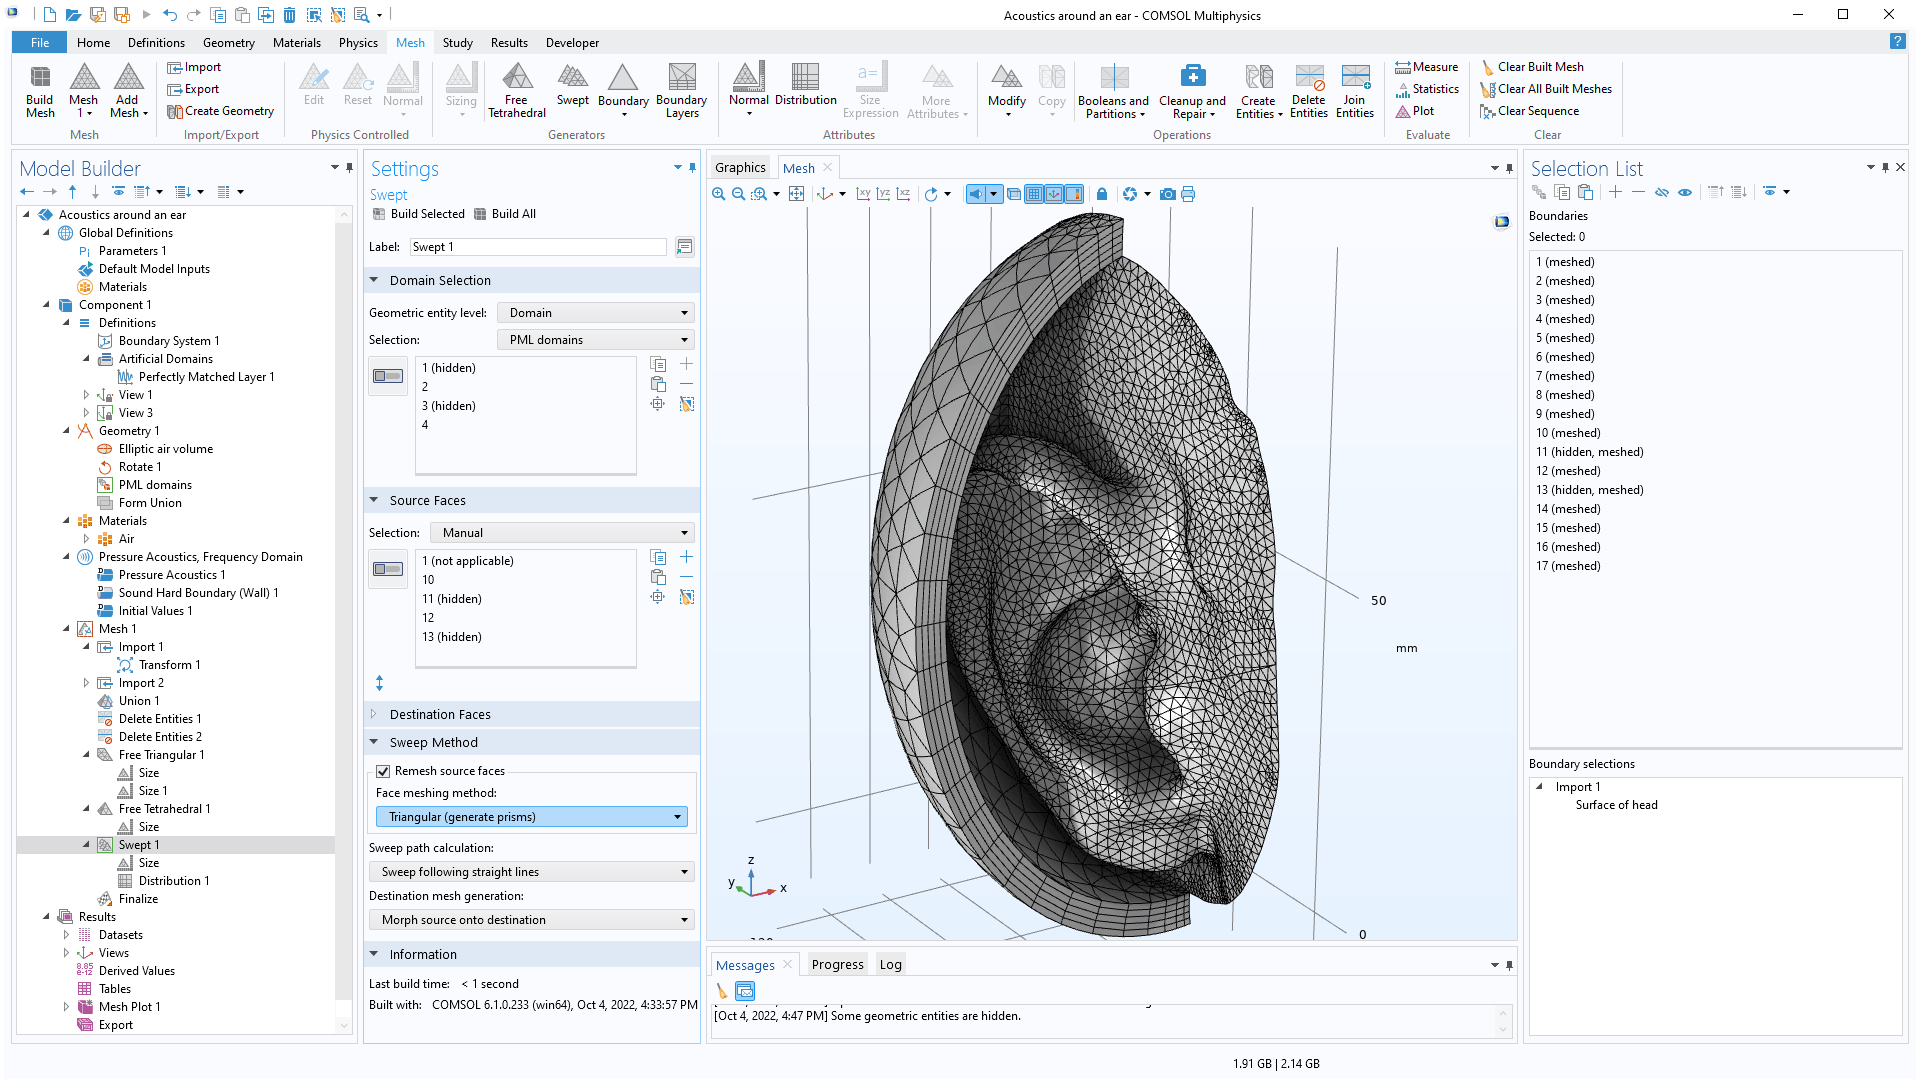 The COMSOL Multiphysics UI showing the Model Builder with the Swept 1 operation selected, the corresponding settings, the Graphics window with a swept mesh of an ear model, and the Selection List window.